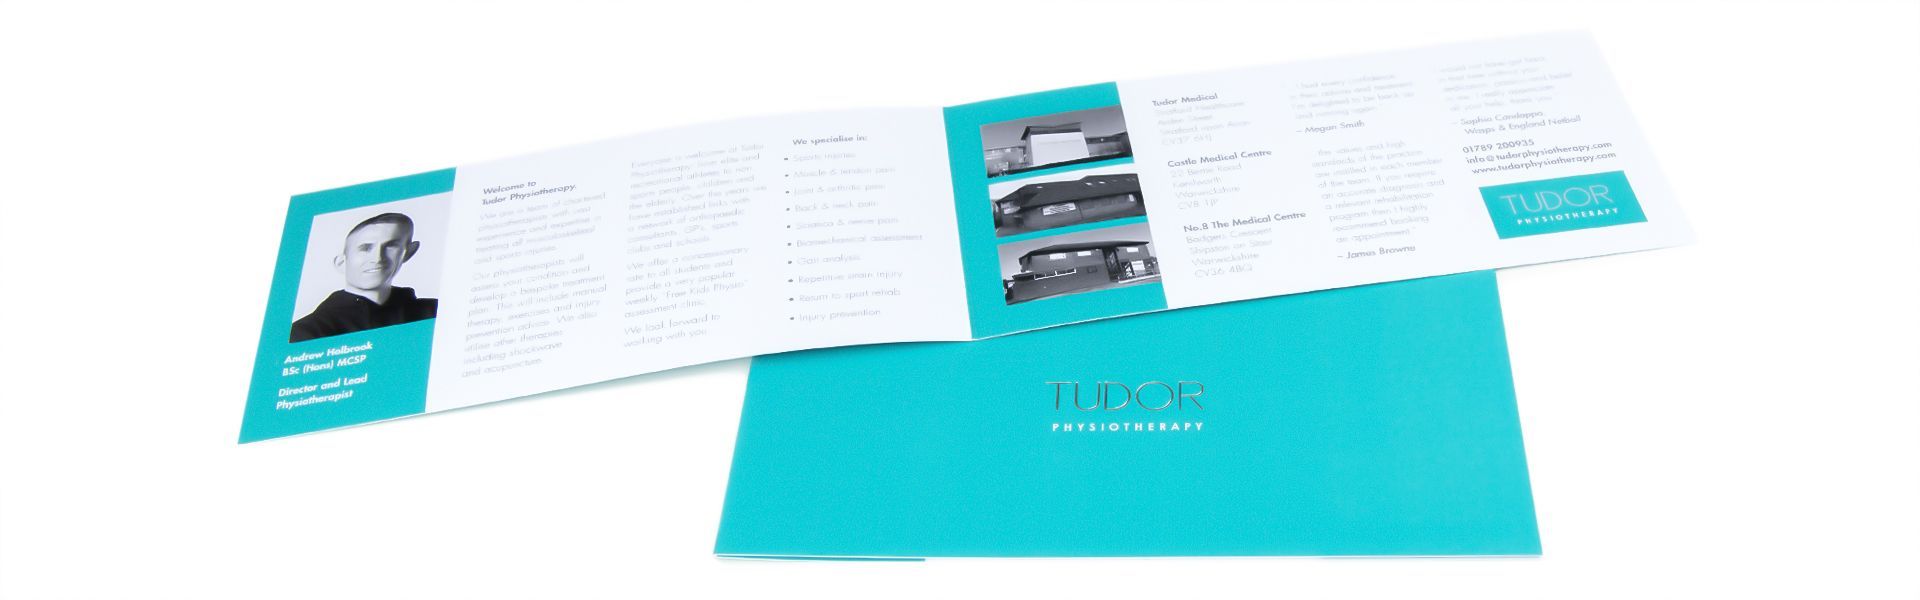 a brochure for tudor physiotherapy with a picture of drew holbrook